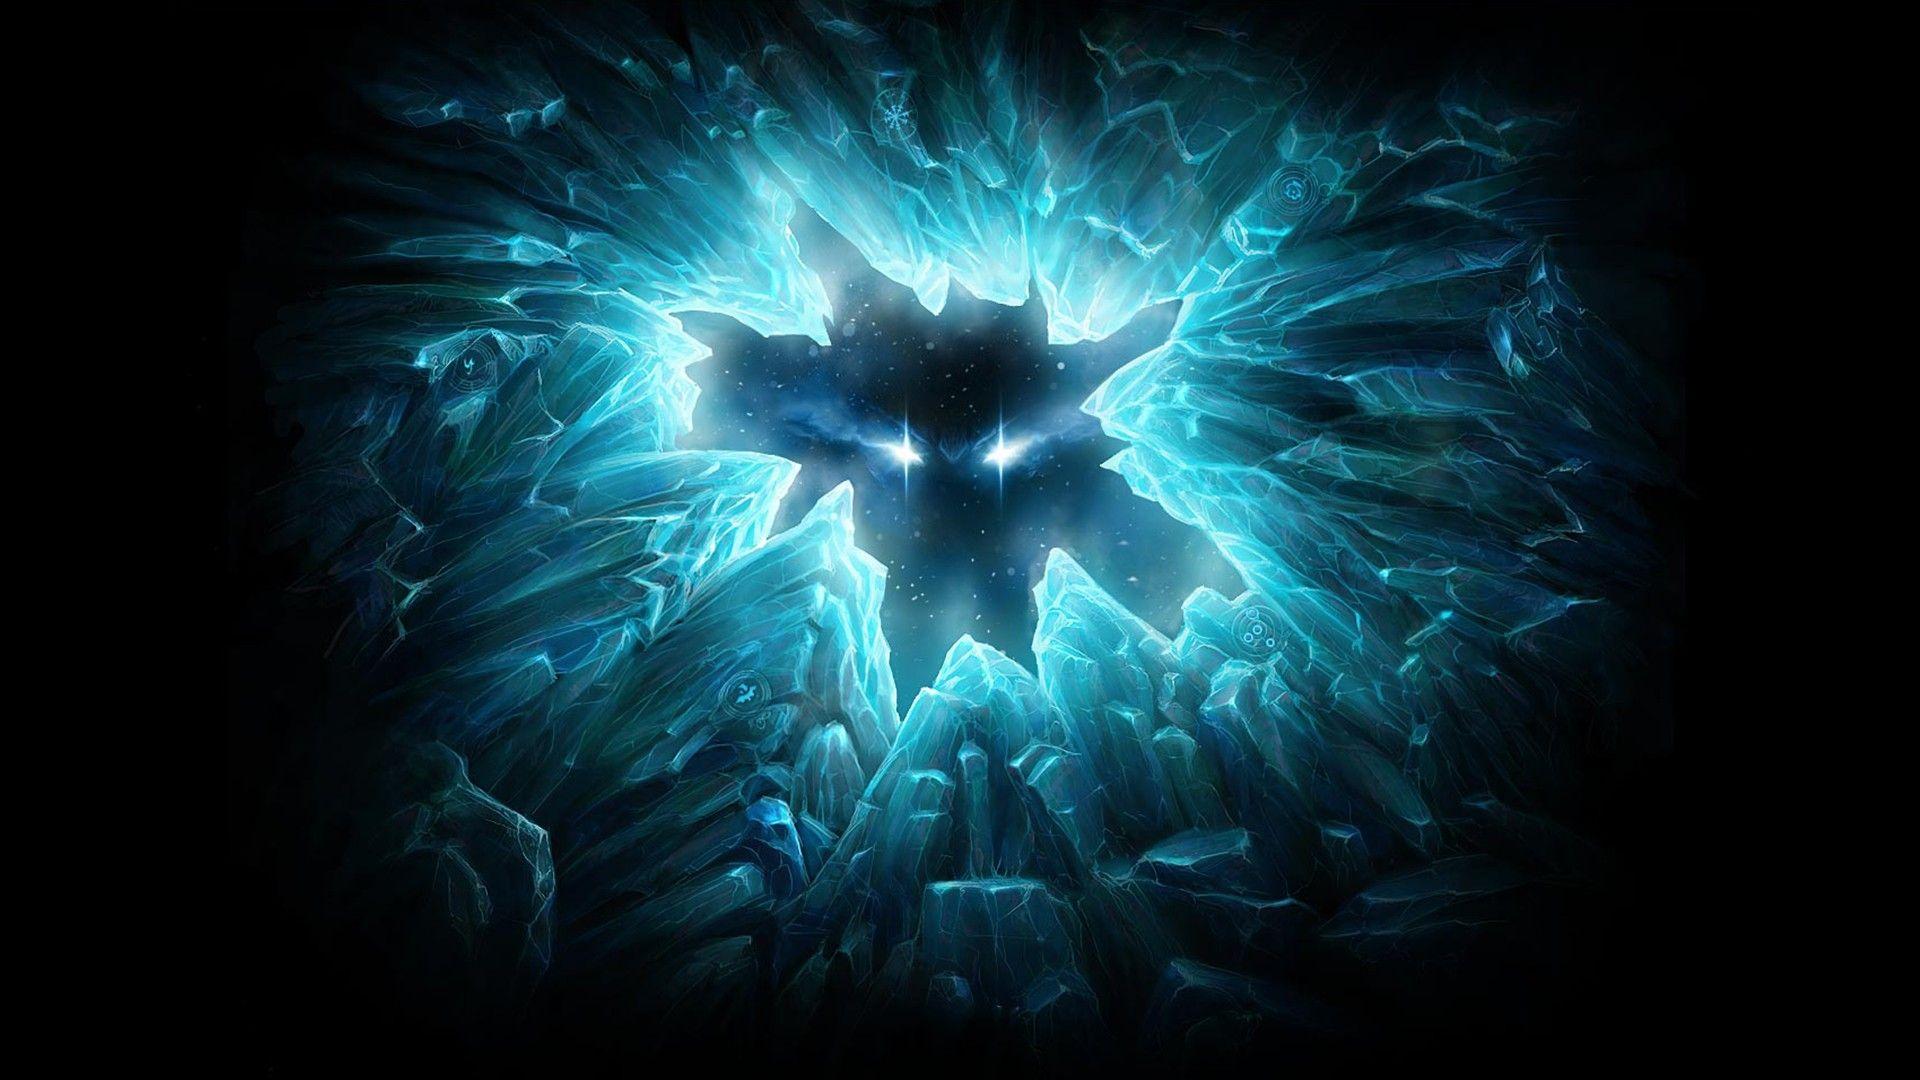 Download WoW Lich King Wallpaper For iPad 640×1136 Lich King